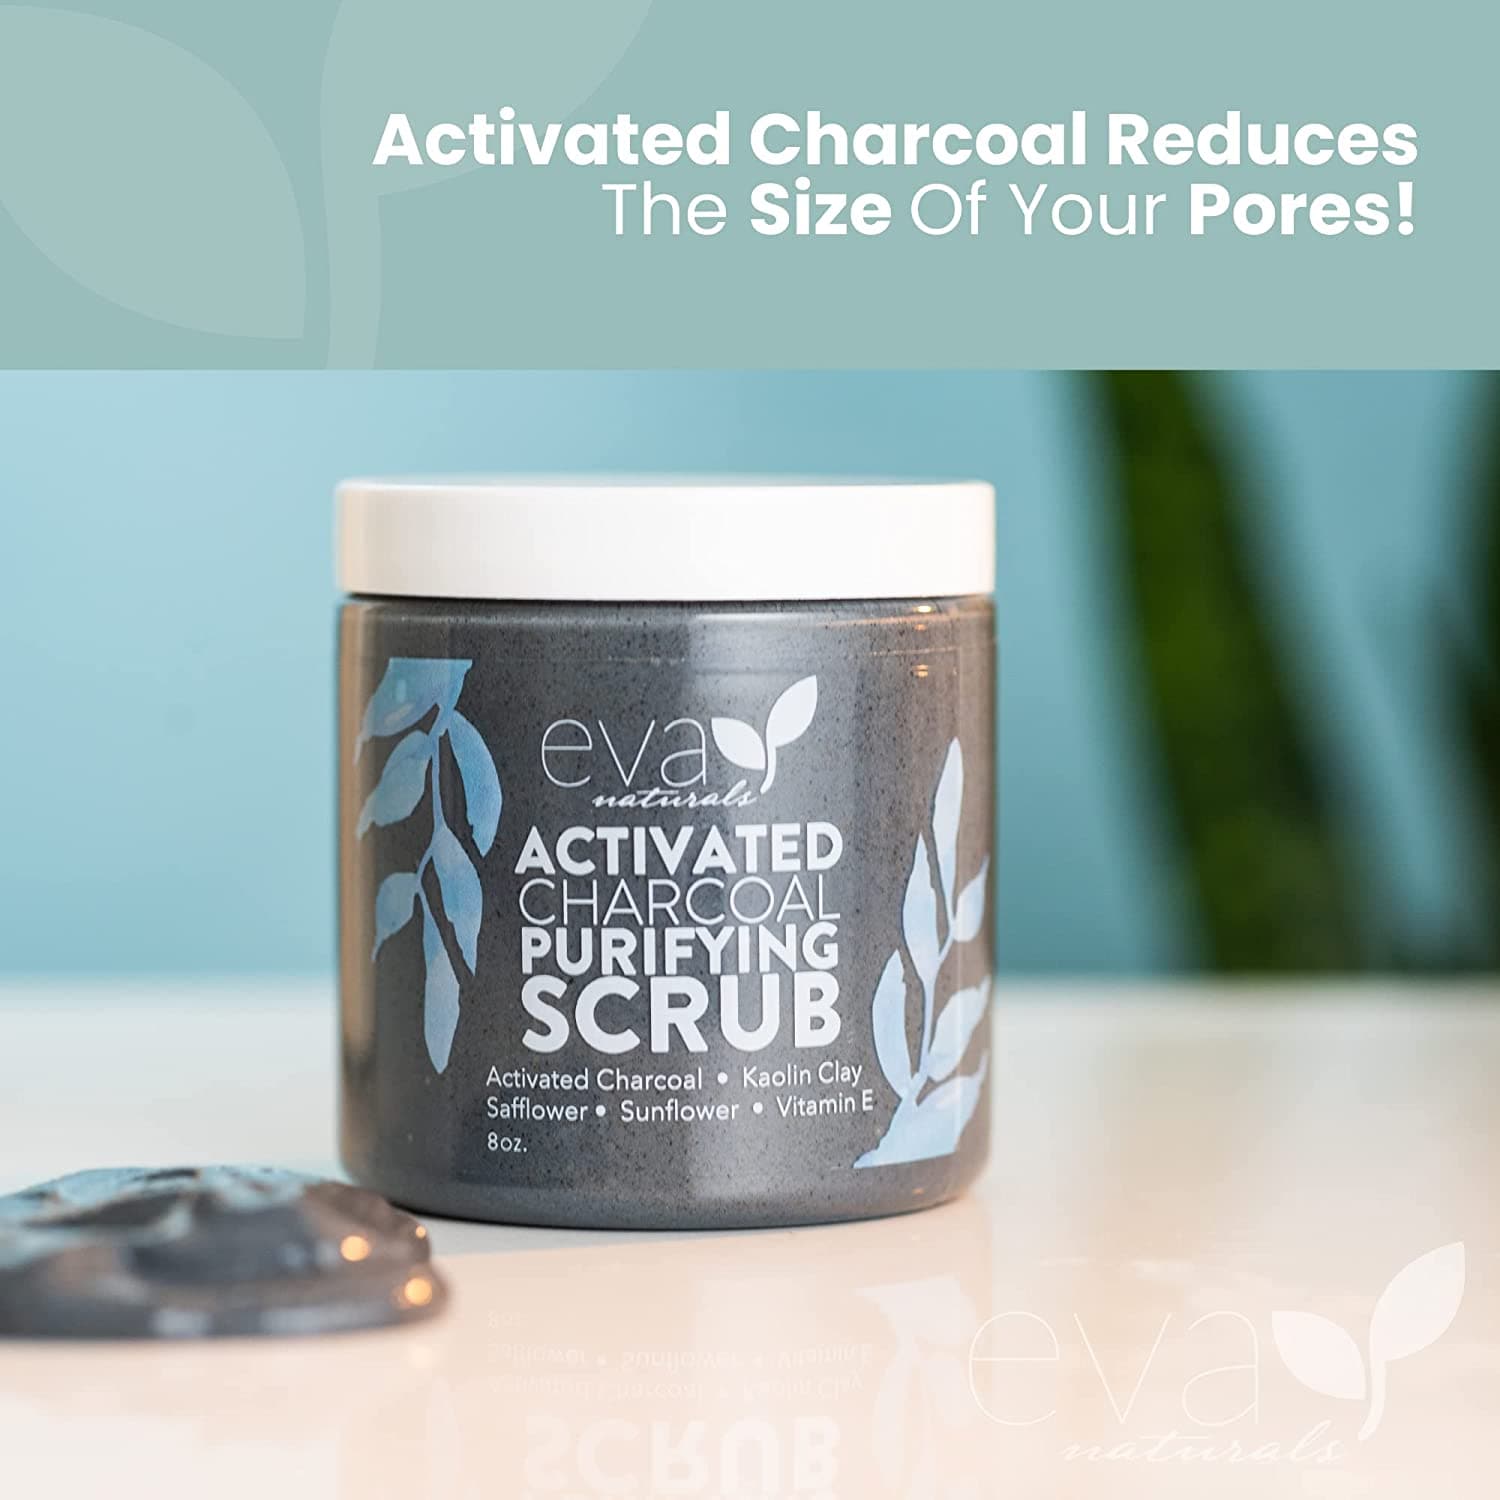 Activated charcoal Purifying Scrub